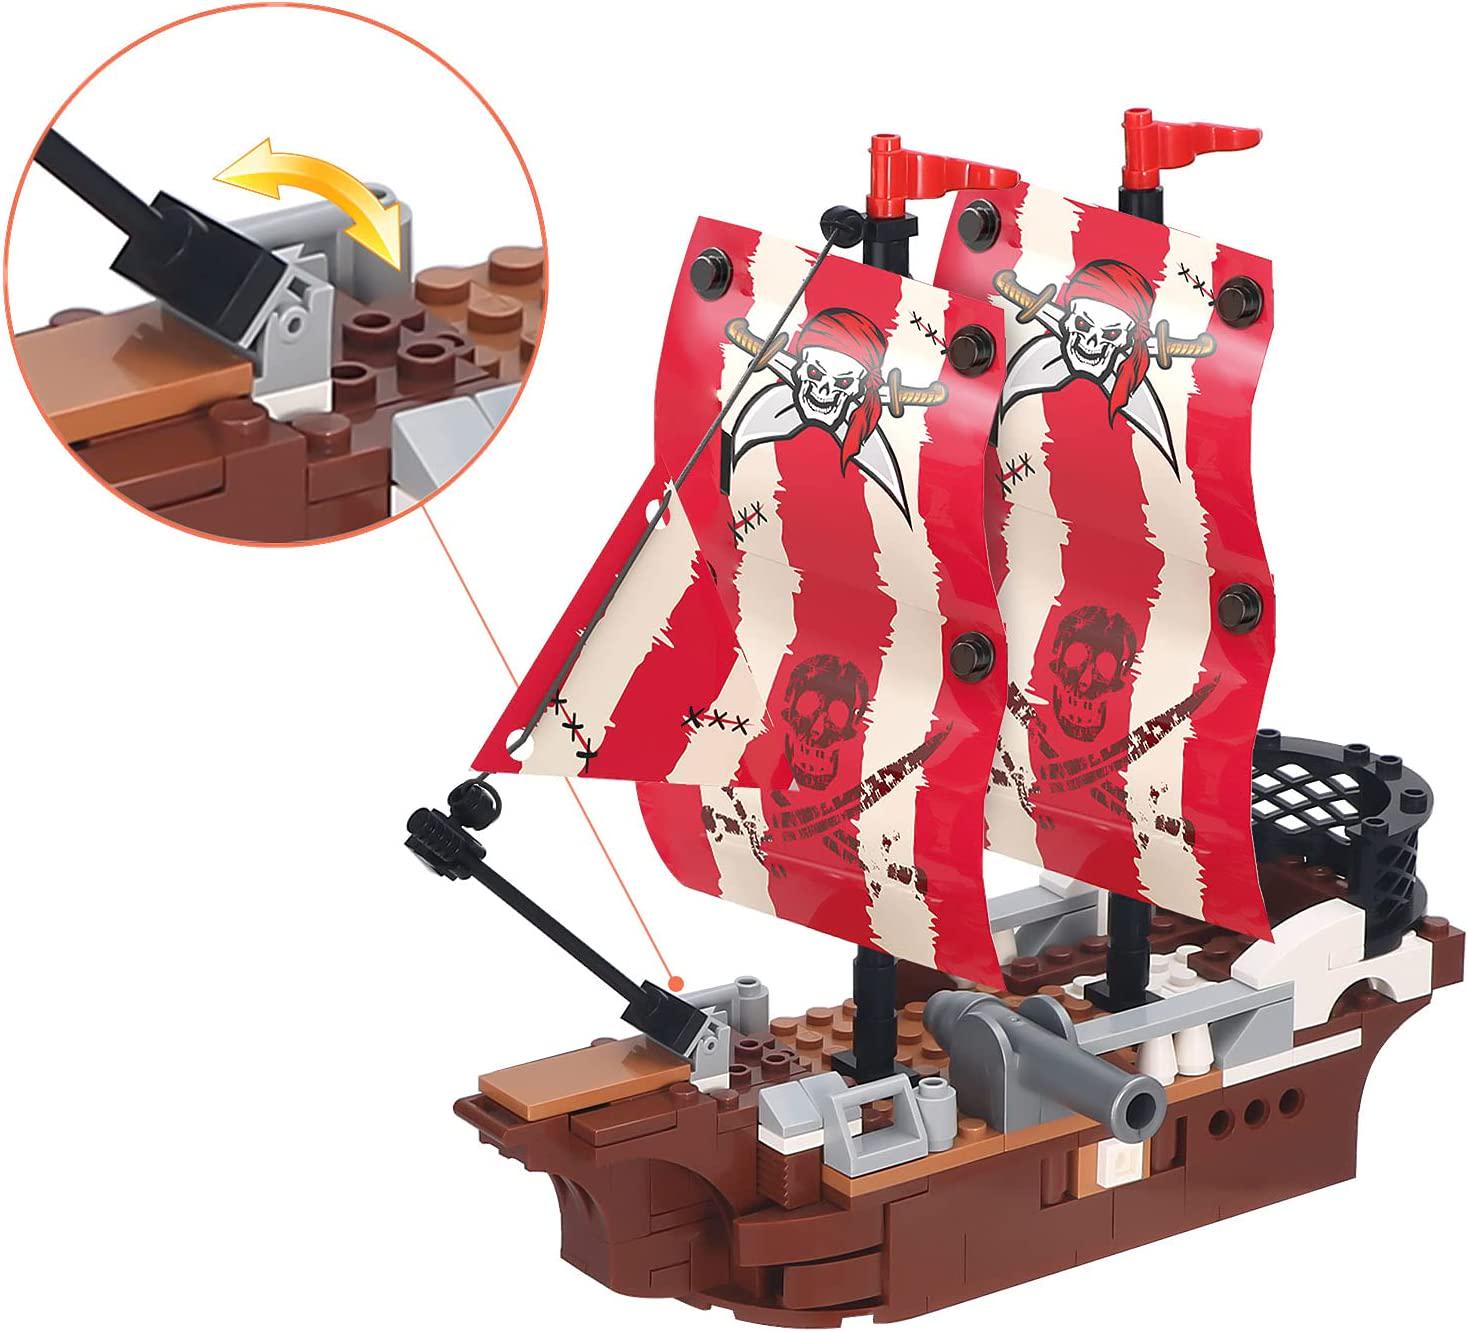 Finebely, Finebely 3 in 1 Pirate Ship Building Set 260 pcs